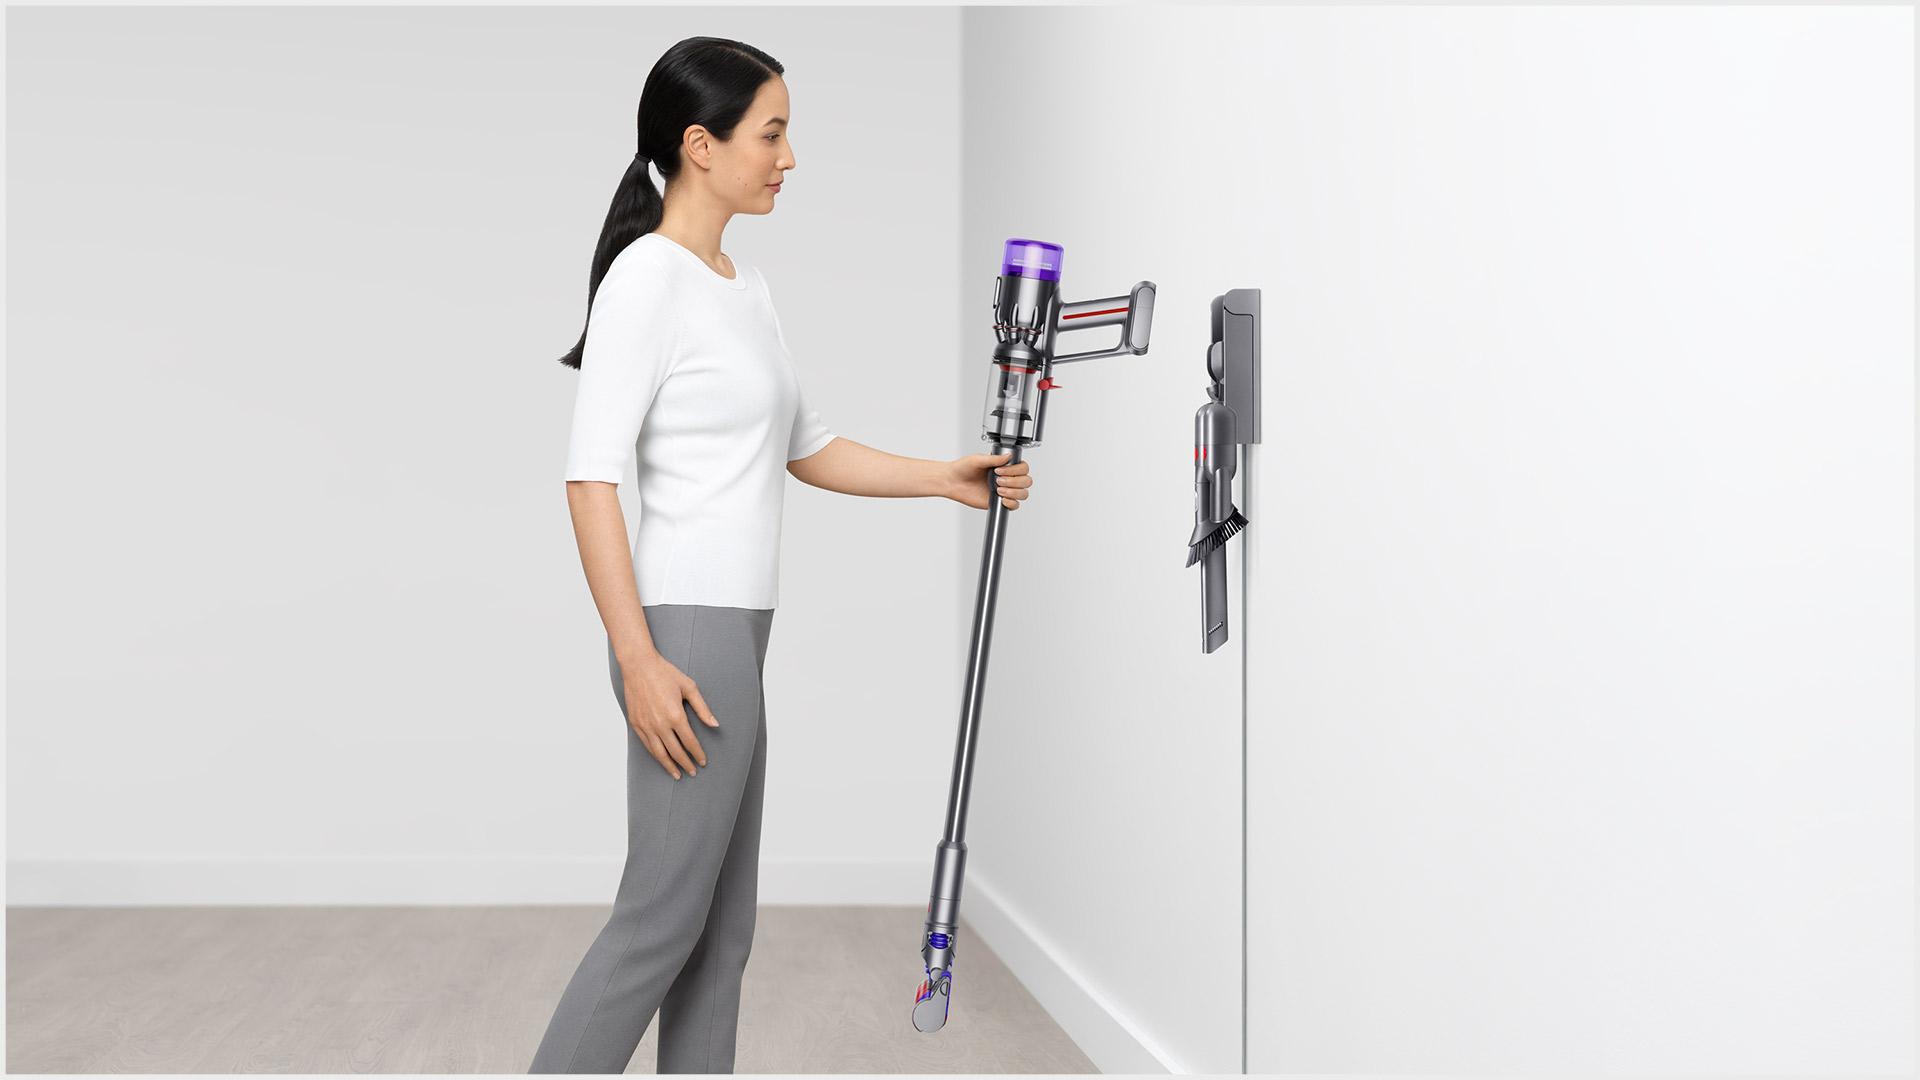 Woman placing vacuum into the wall dock